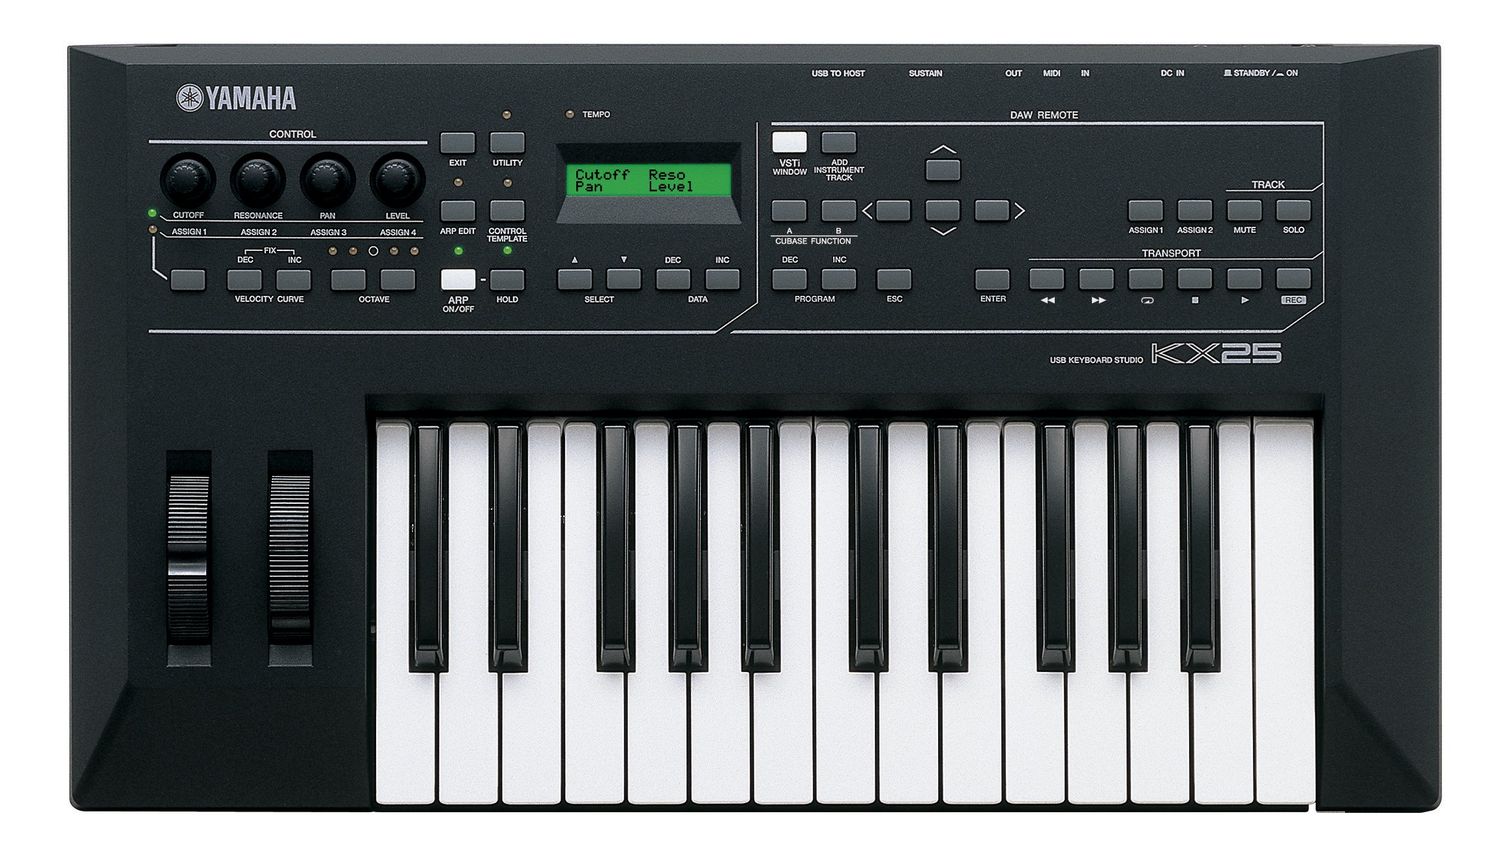 How To Transfer MIDI Files From Computer To Yamaha Keyboard